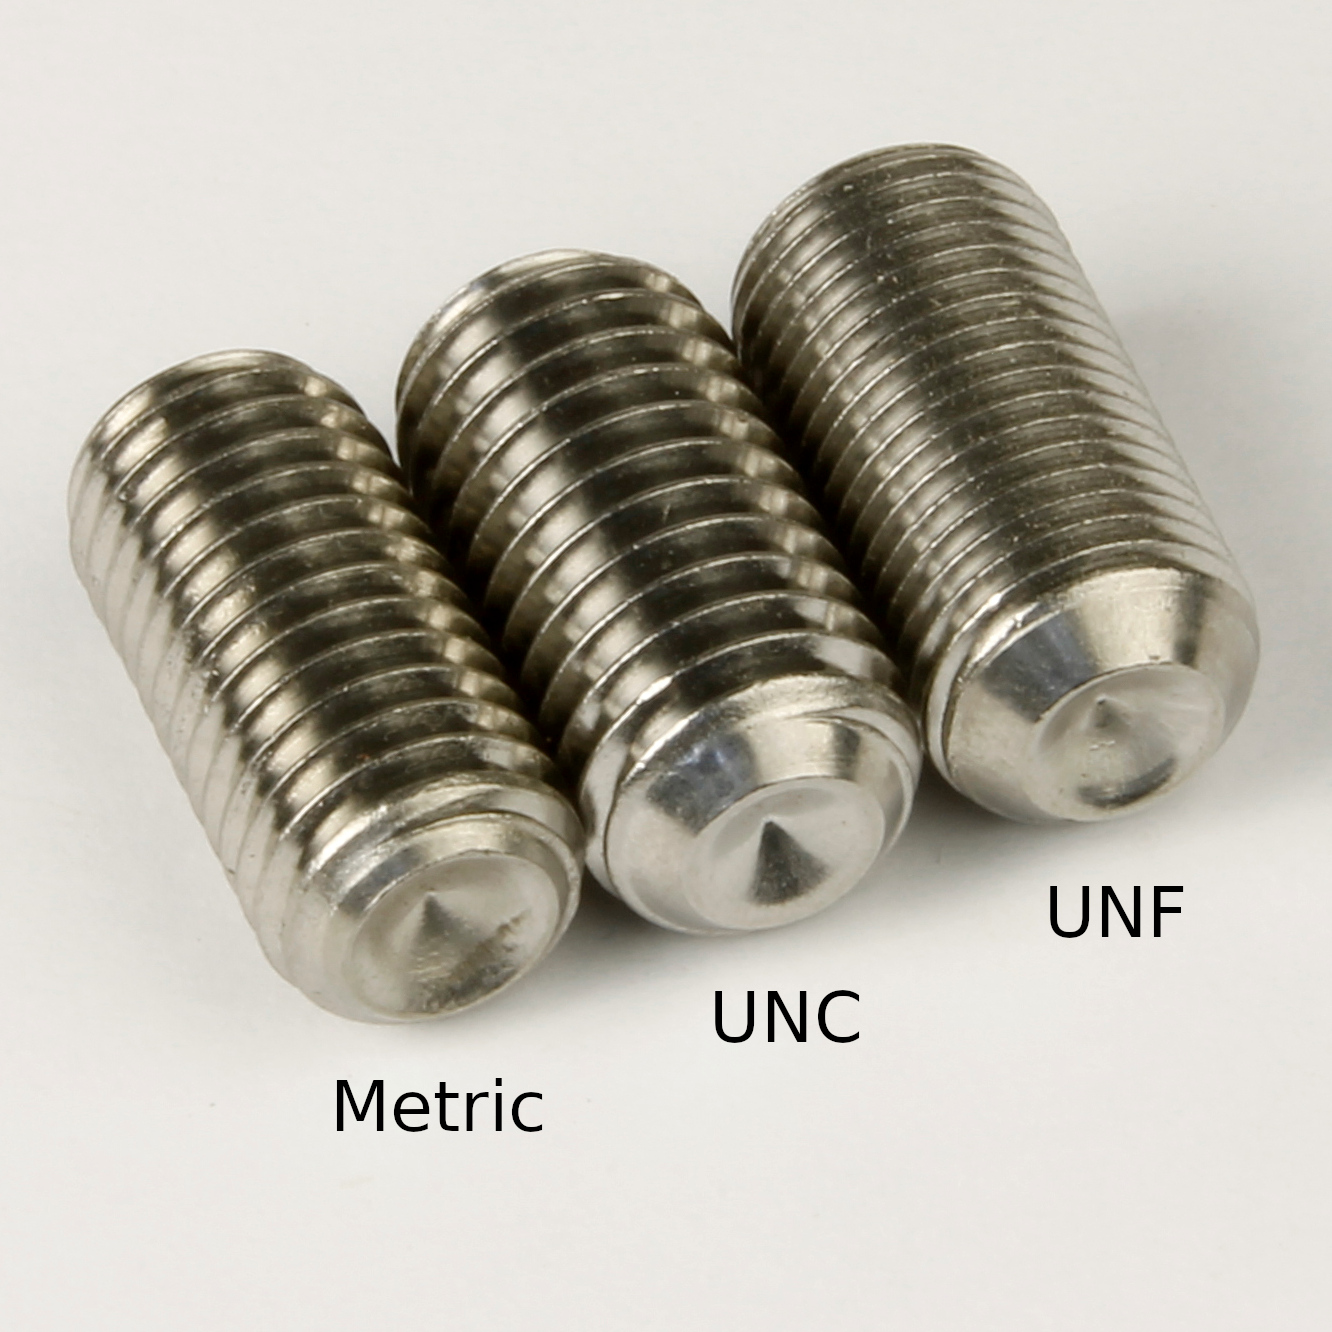 Metric, UNC and UNF grub screw thread forms